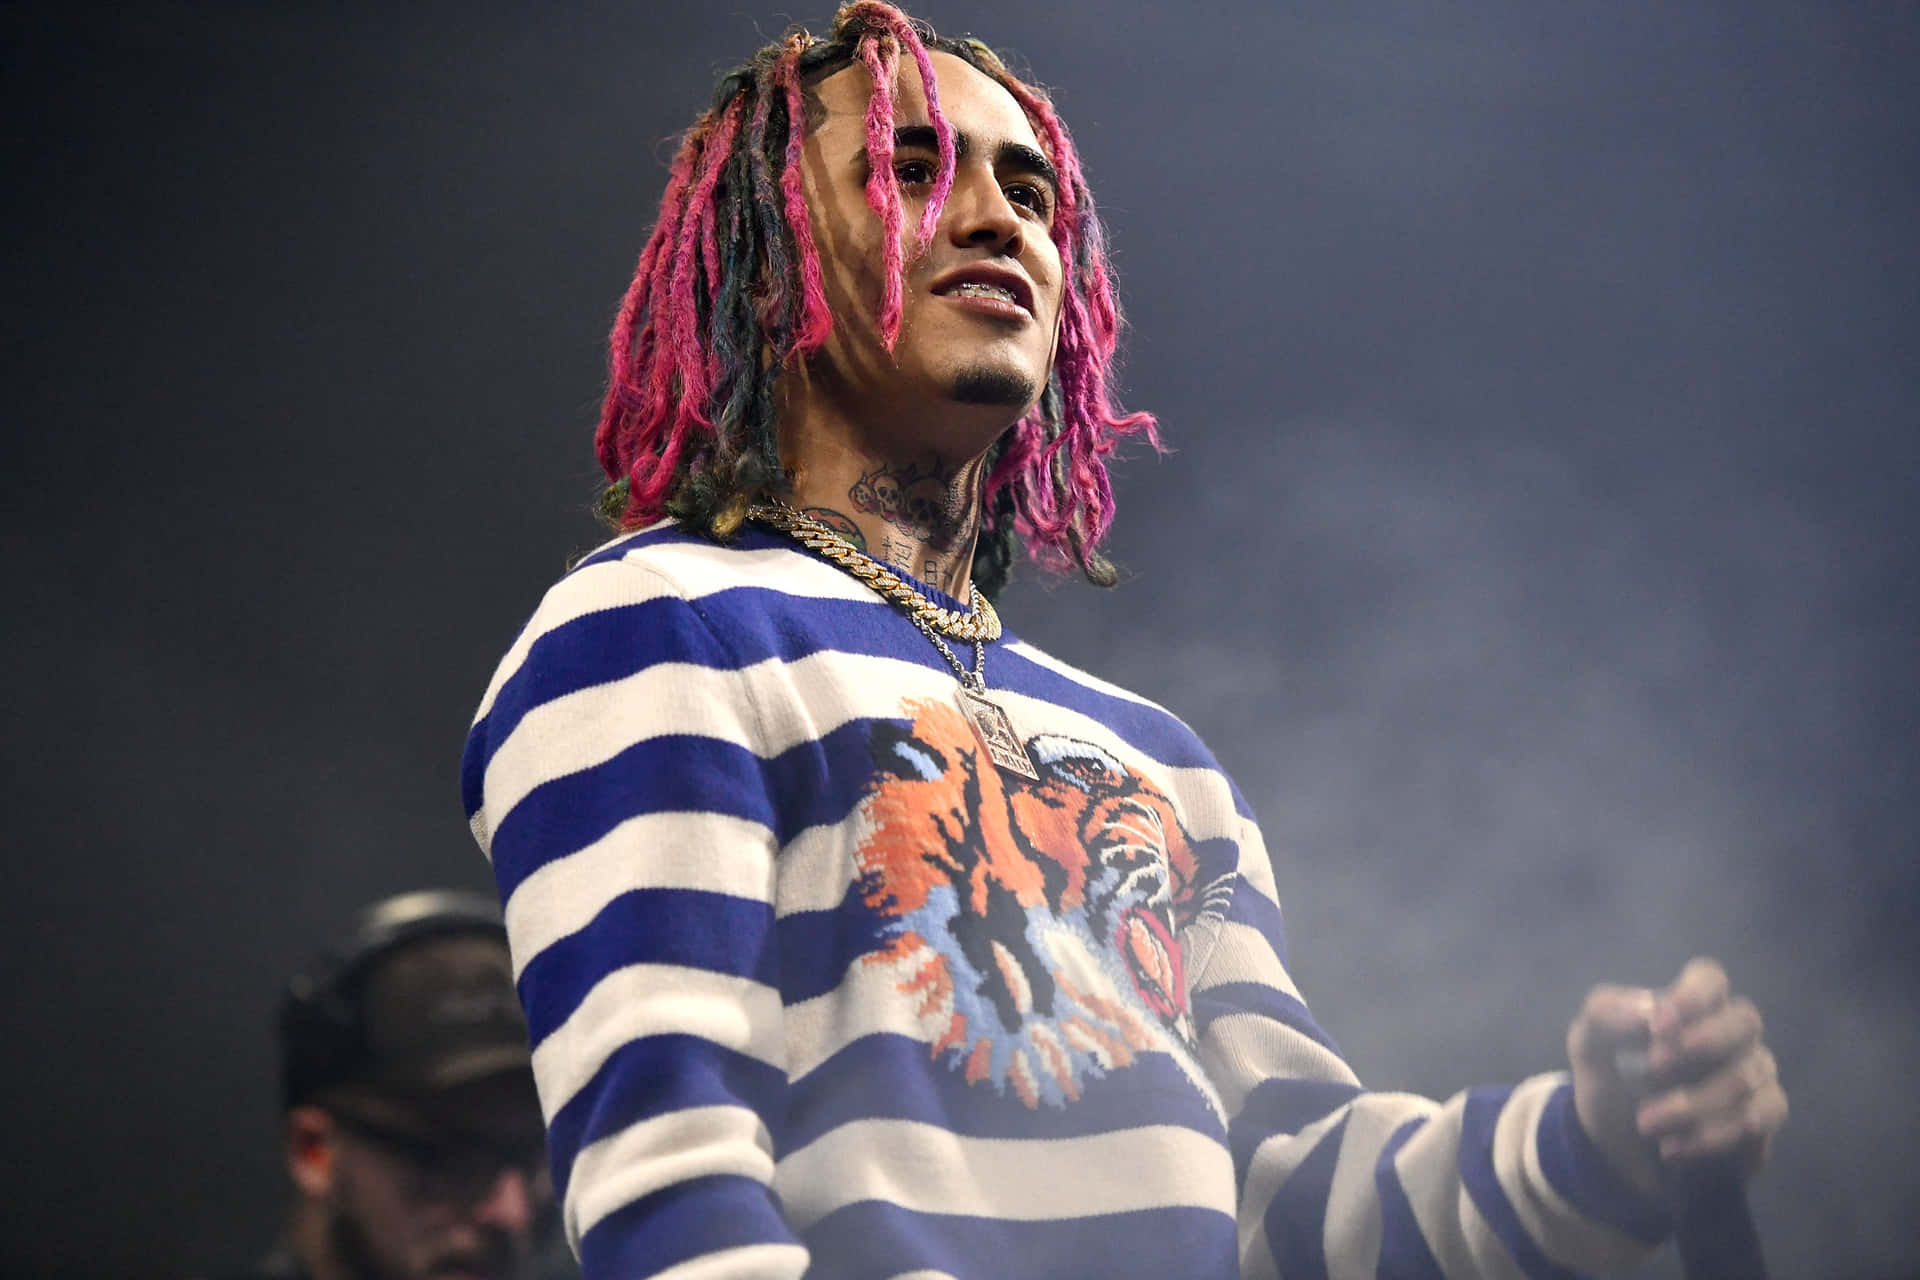 A Man With Pink Dreadlocks On Stage Wallpaper